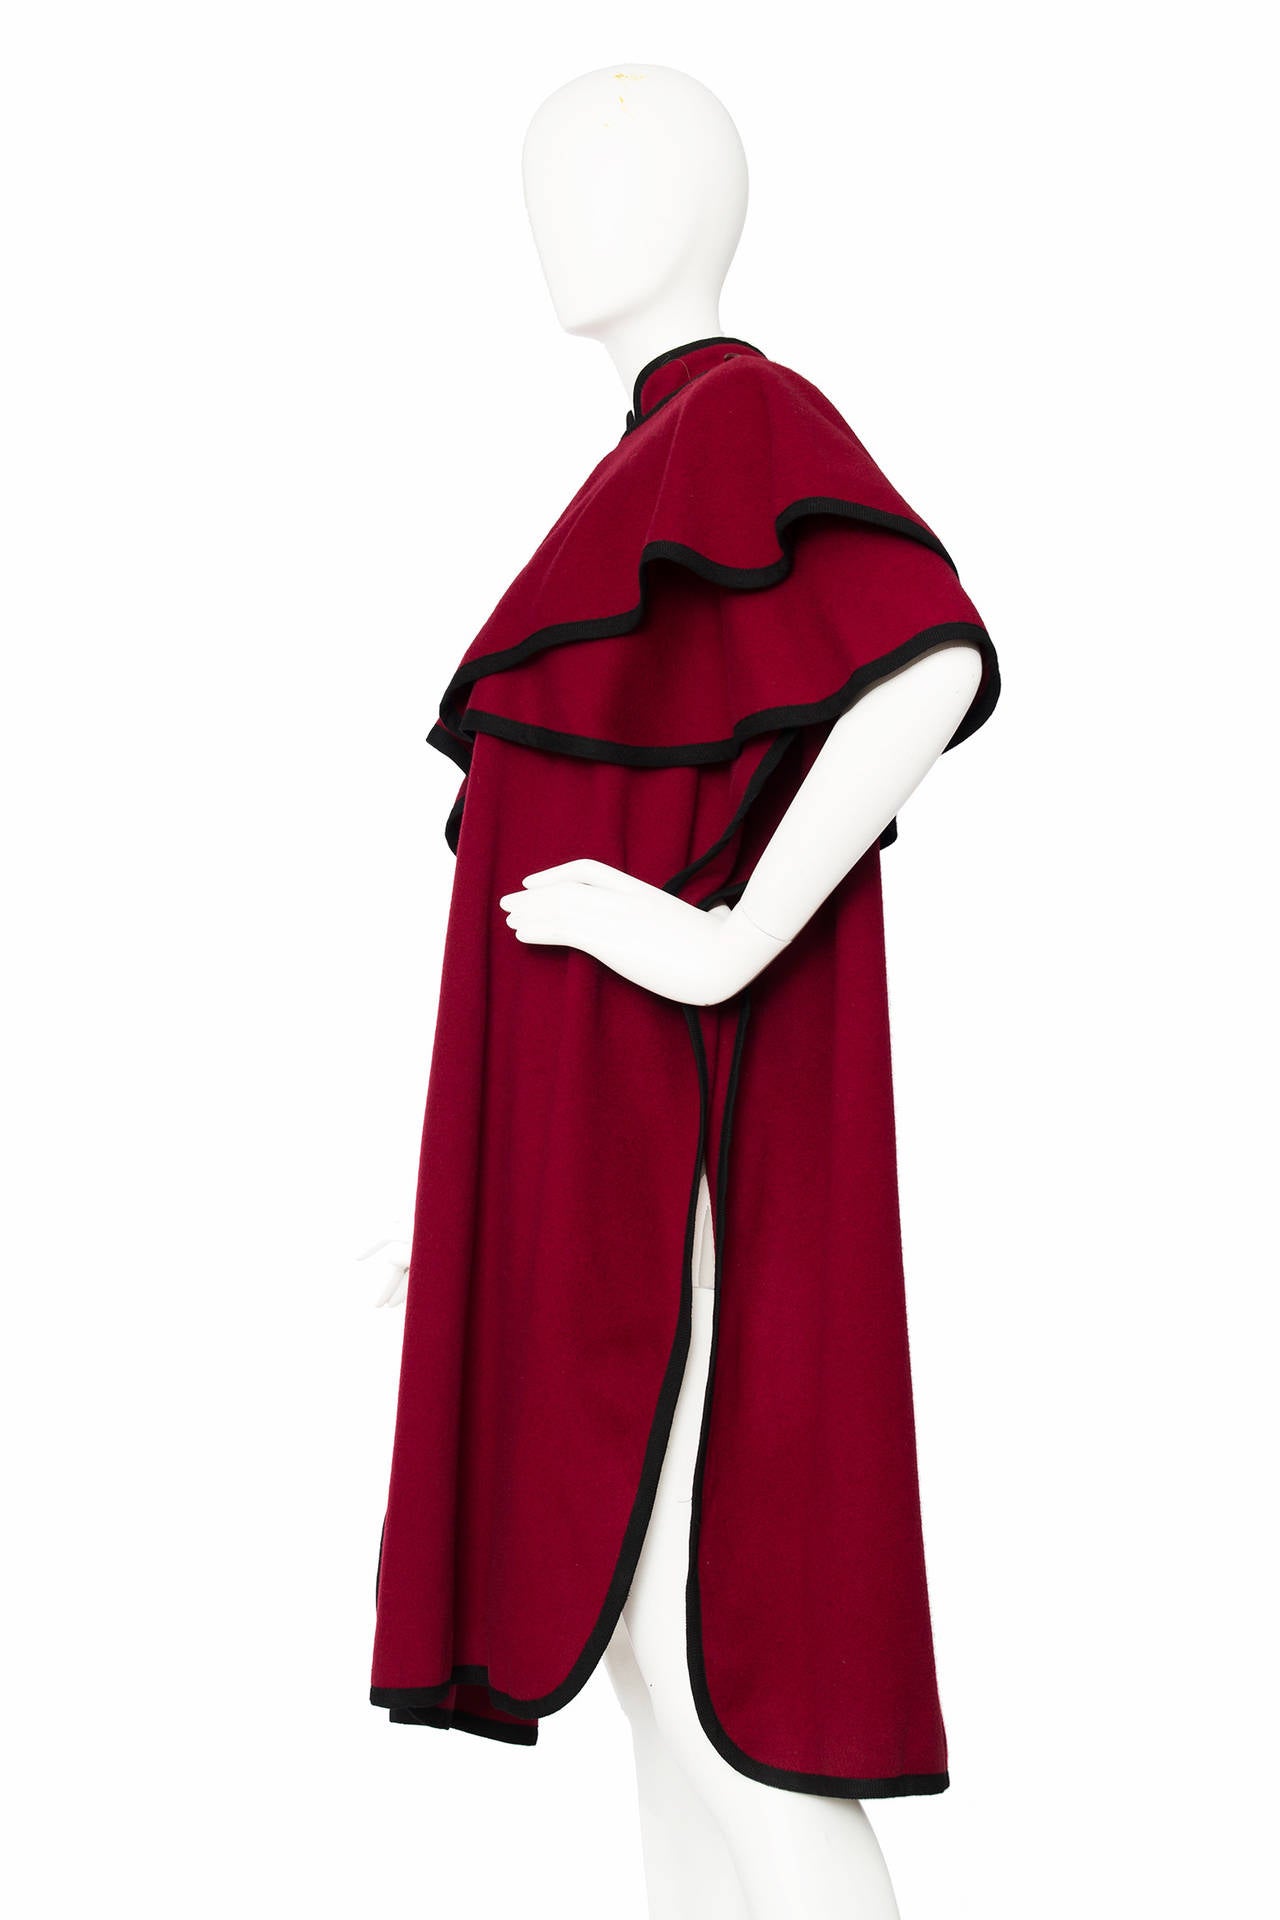 A ca. 1976 Yves Saint Laurent burgundy wool cape with voluminous capelet style sleeves. The cape has a button down front, black trimming and round edges to the hemline, a stand up collar and a single one button closure to the side of the garment.